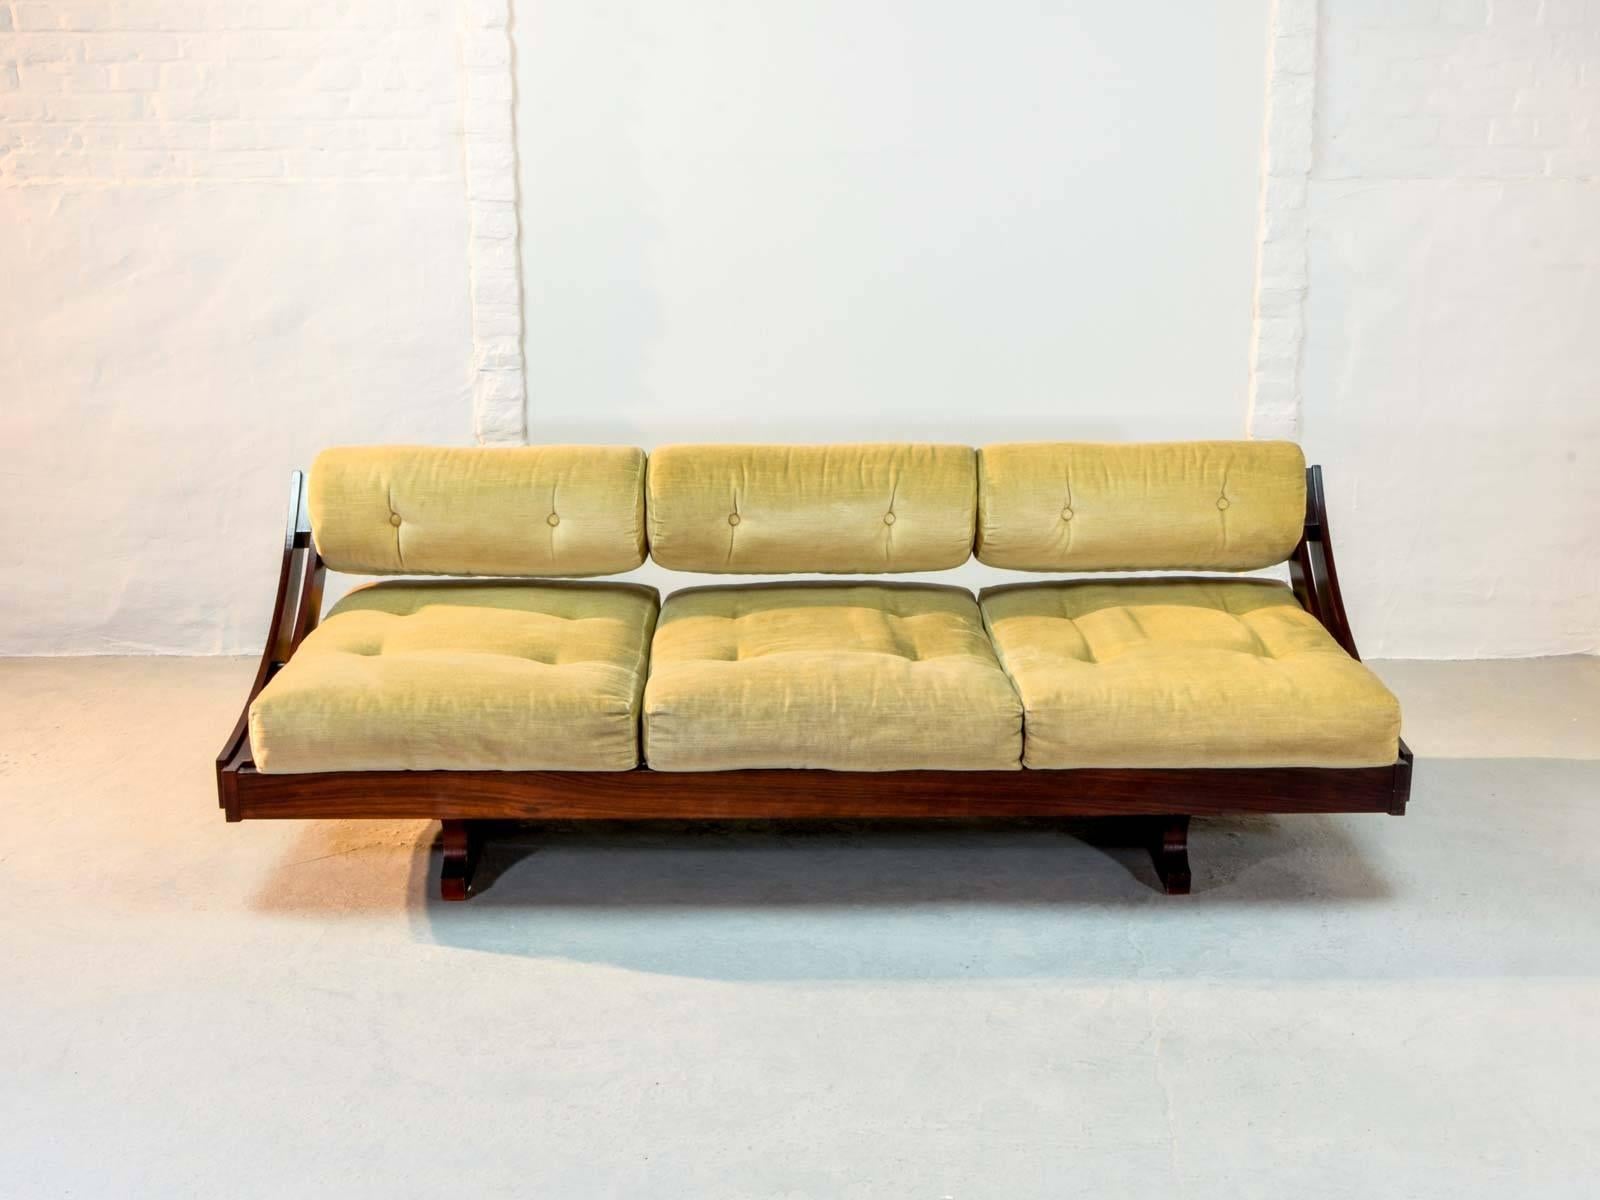 Veneer Superb Champagne Colored Sormani Sofa / Daybed GS 195 by Gianni Songia